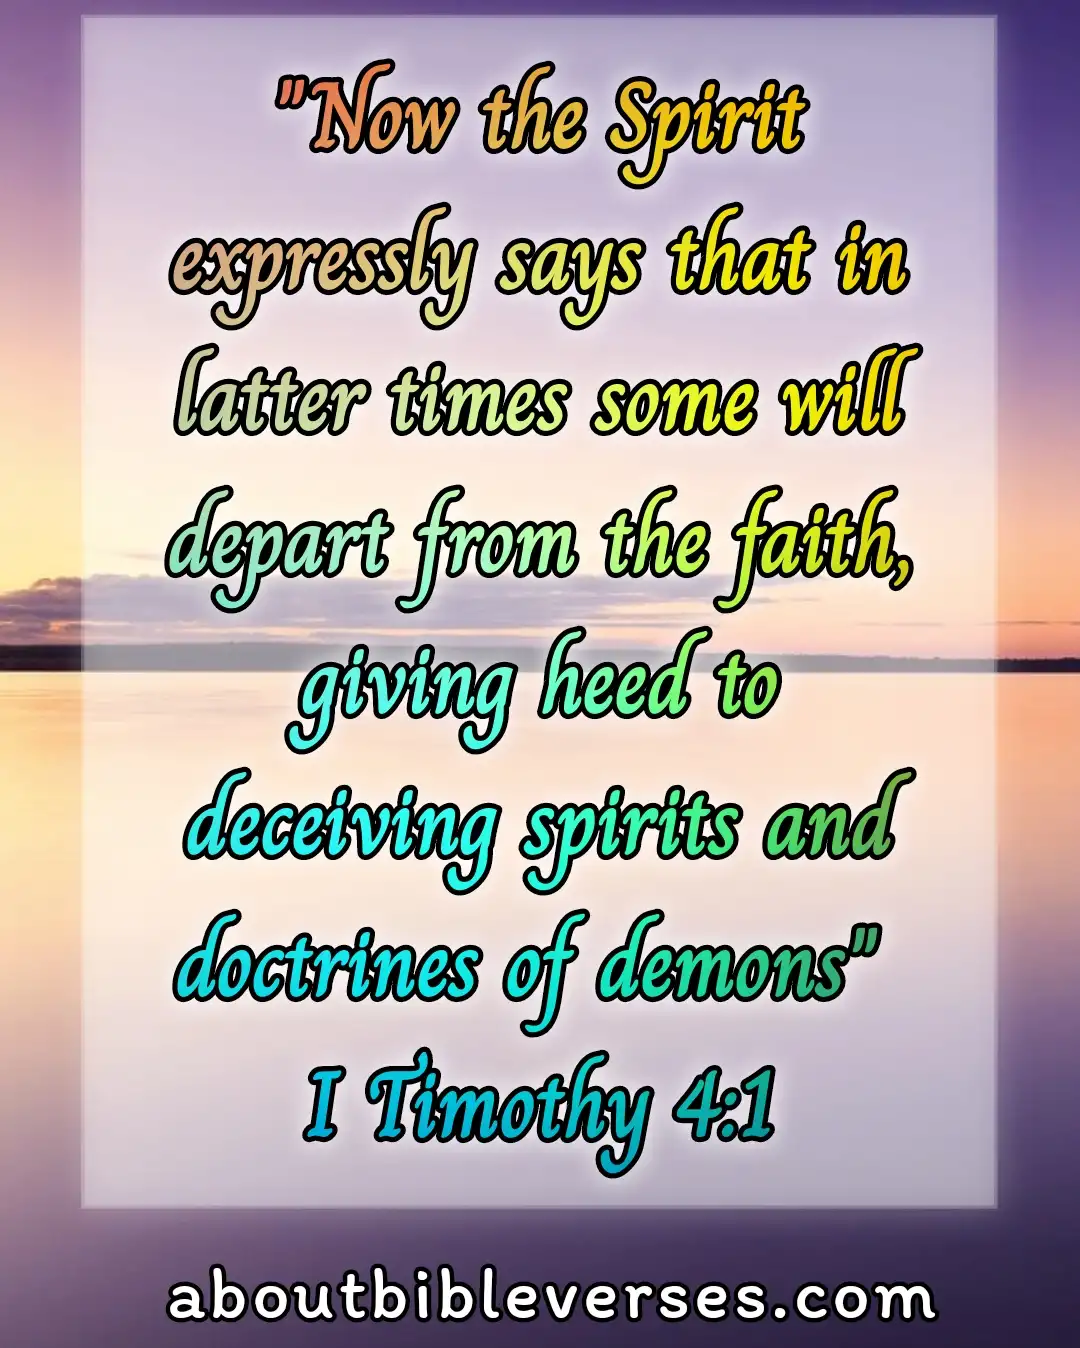 bible verse about deception in the last days (1 Timothy 4:1)